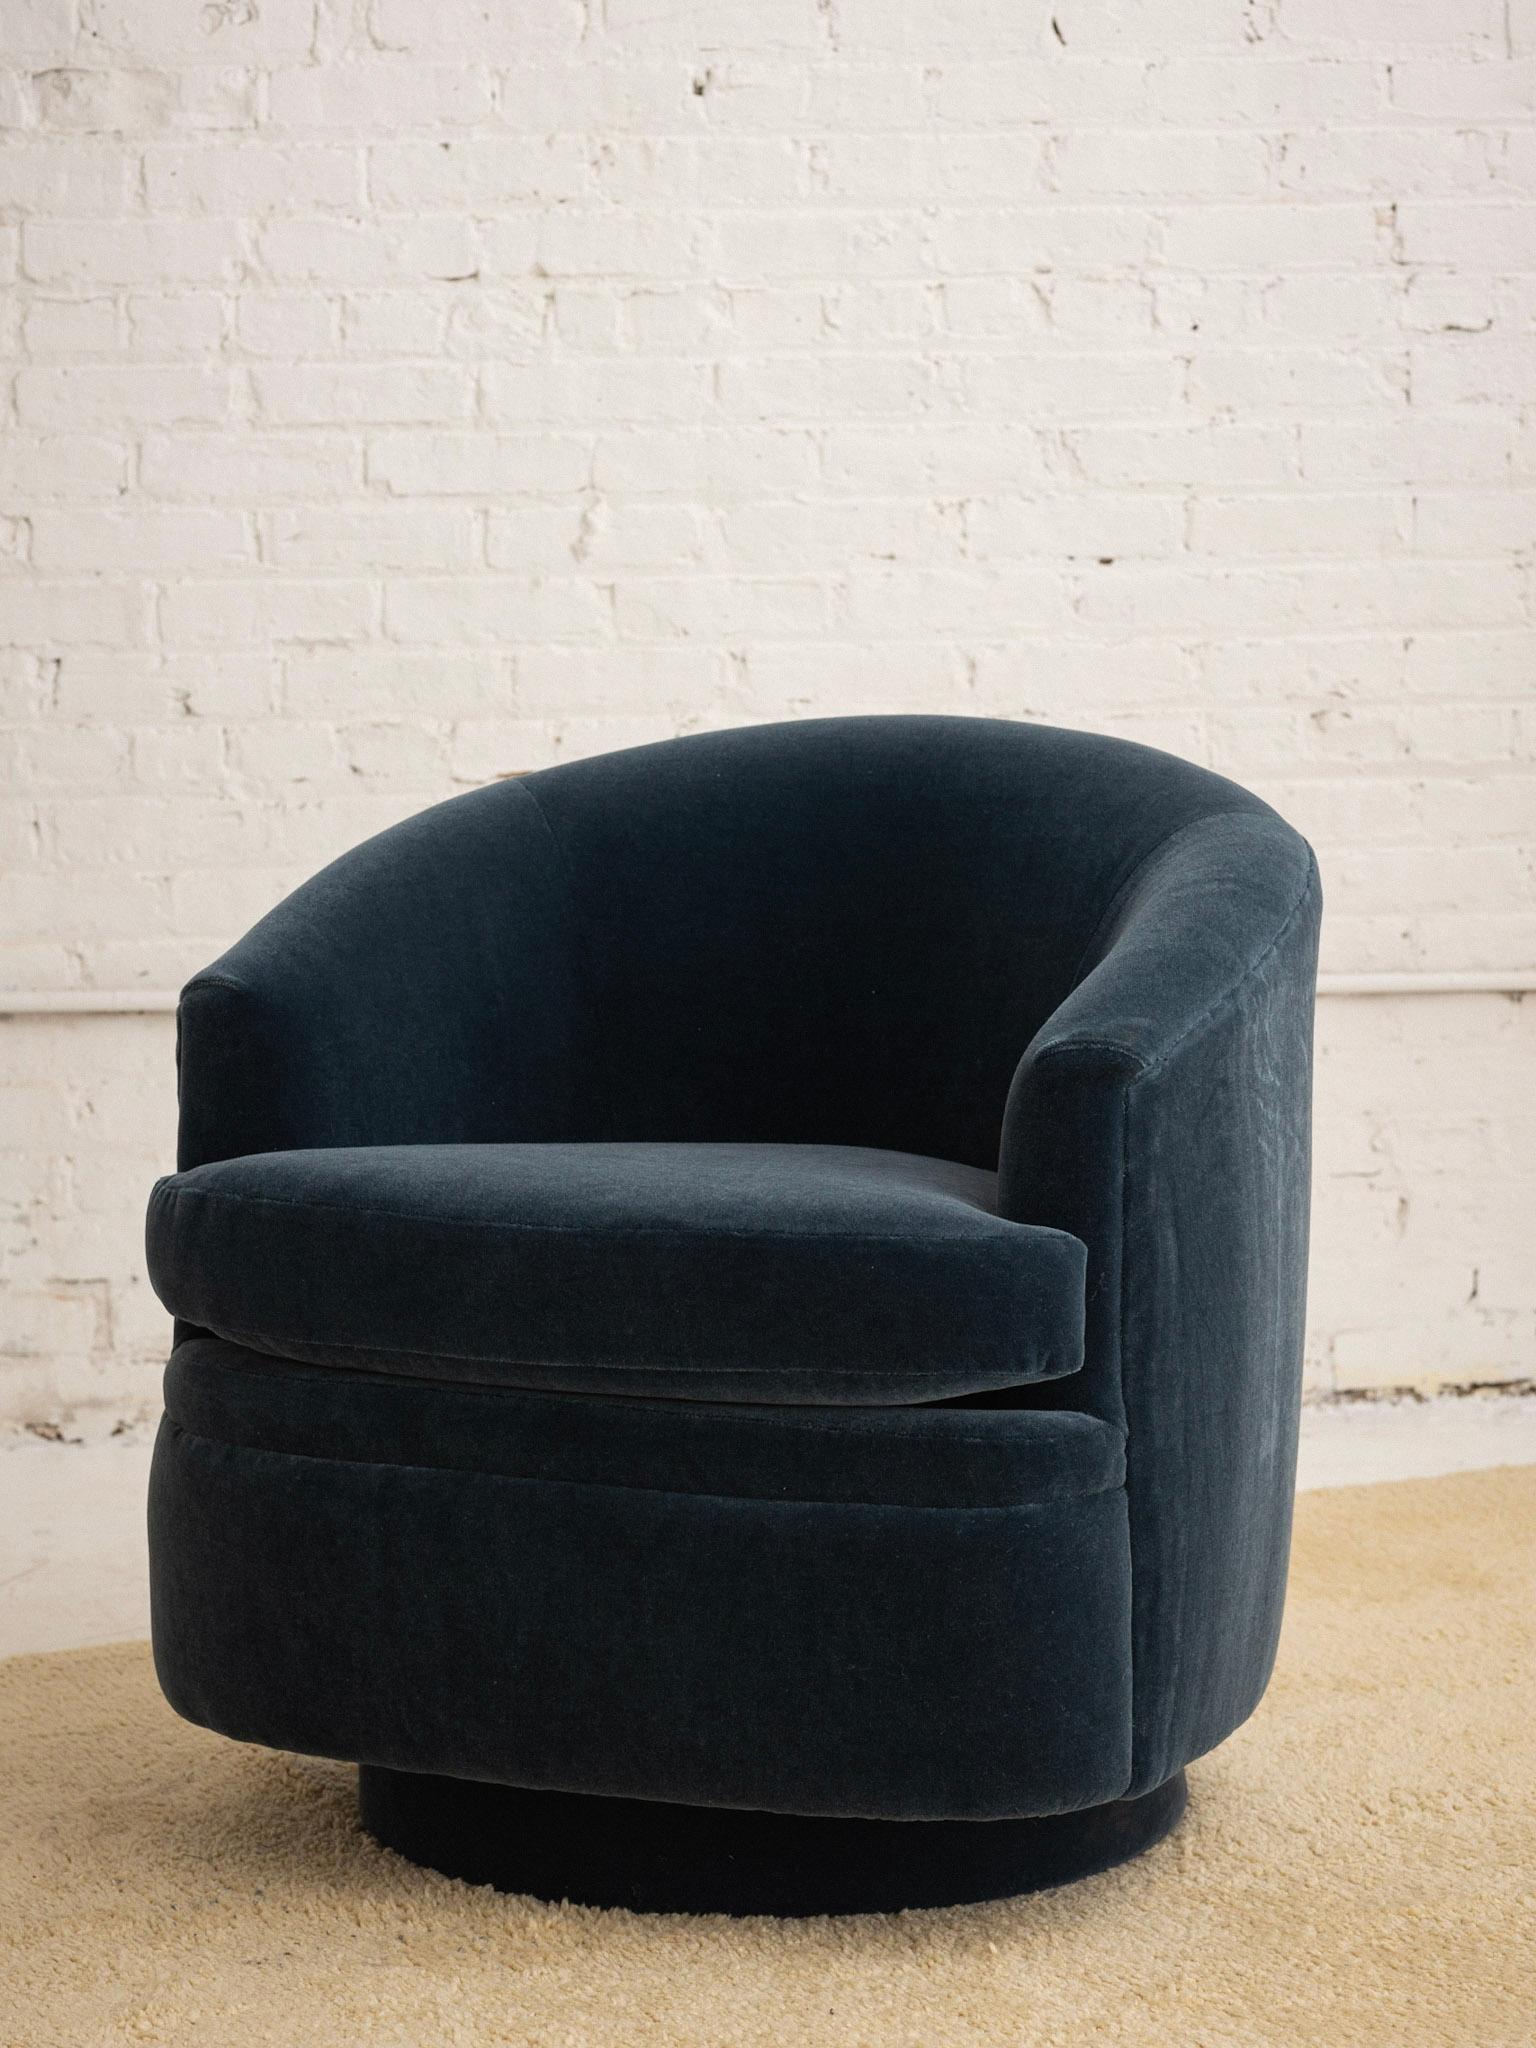 American Swivel Lounge Chair in Teal Mohair